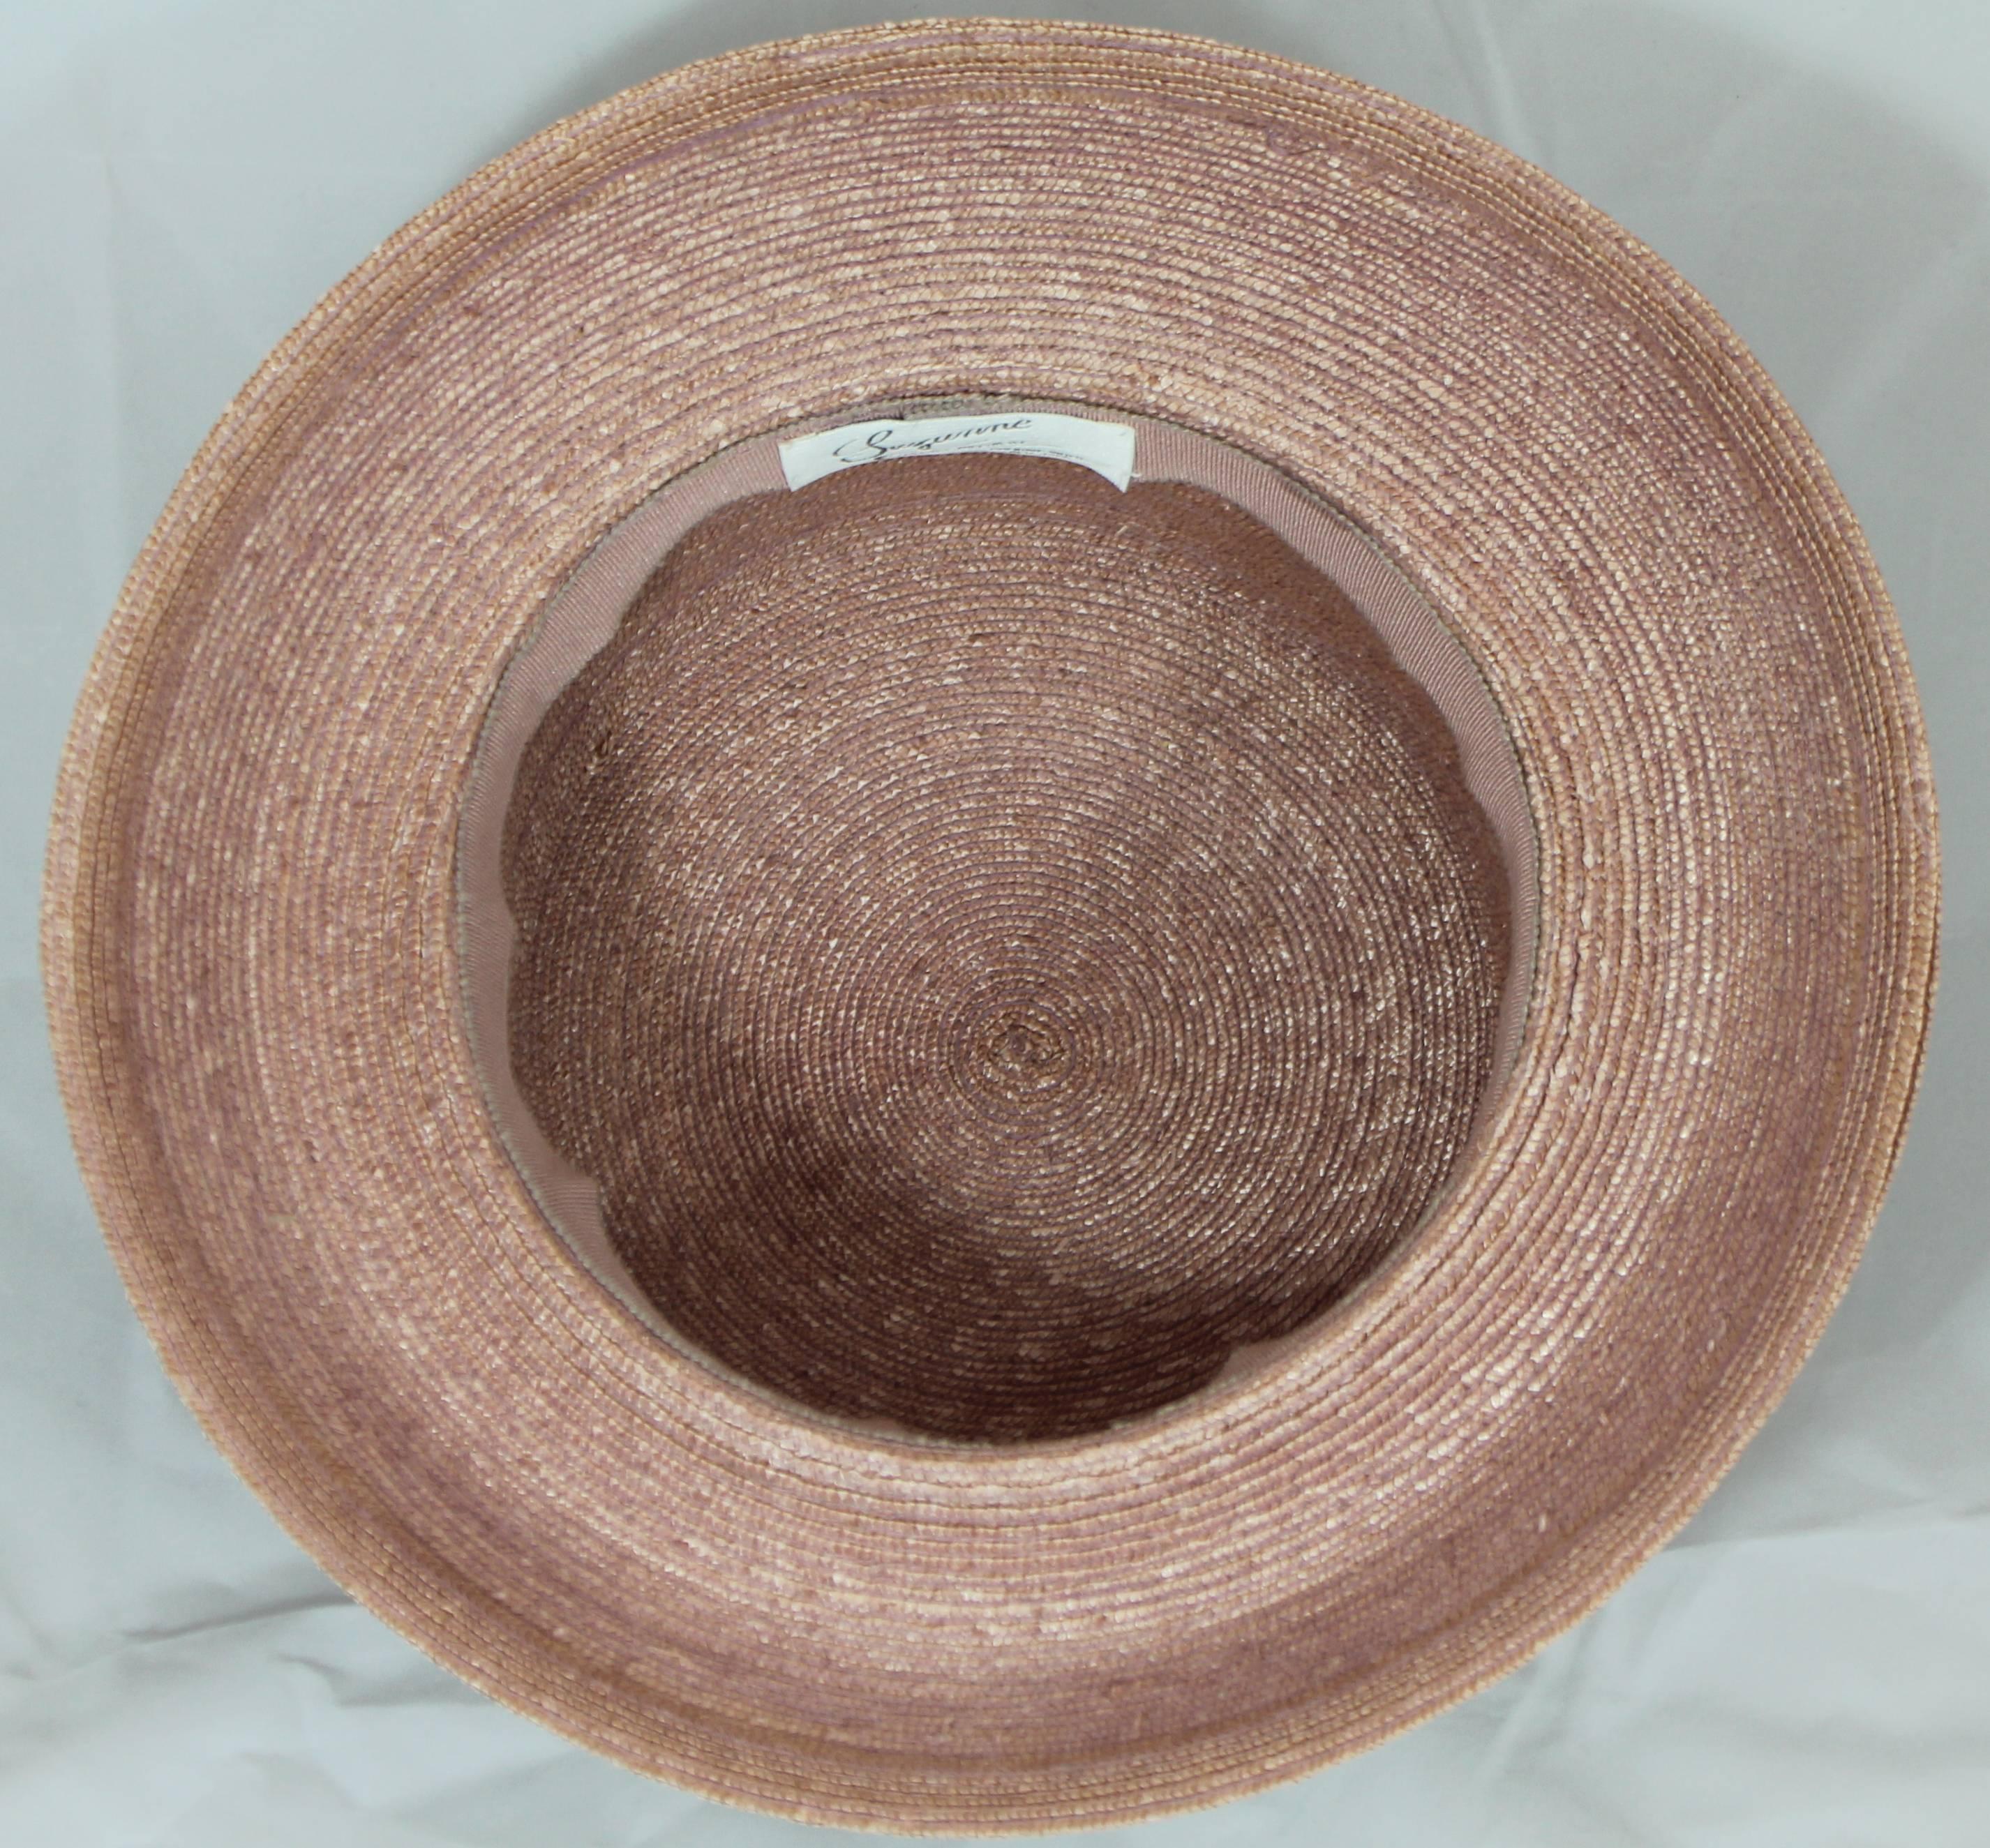 Women's Suzanne Couture Millinery Blush Straw Hat